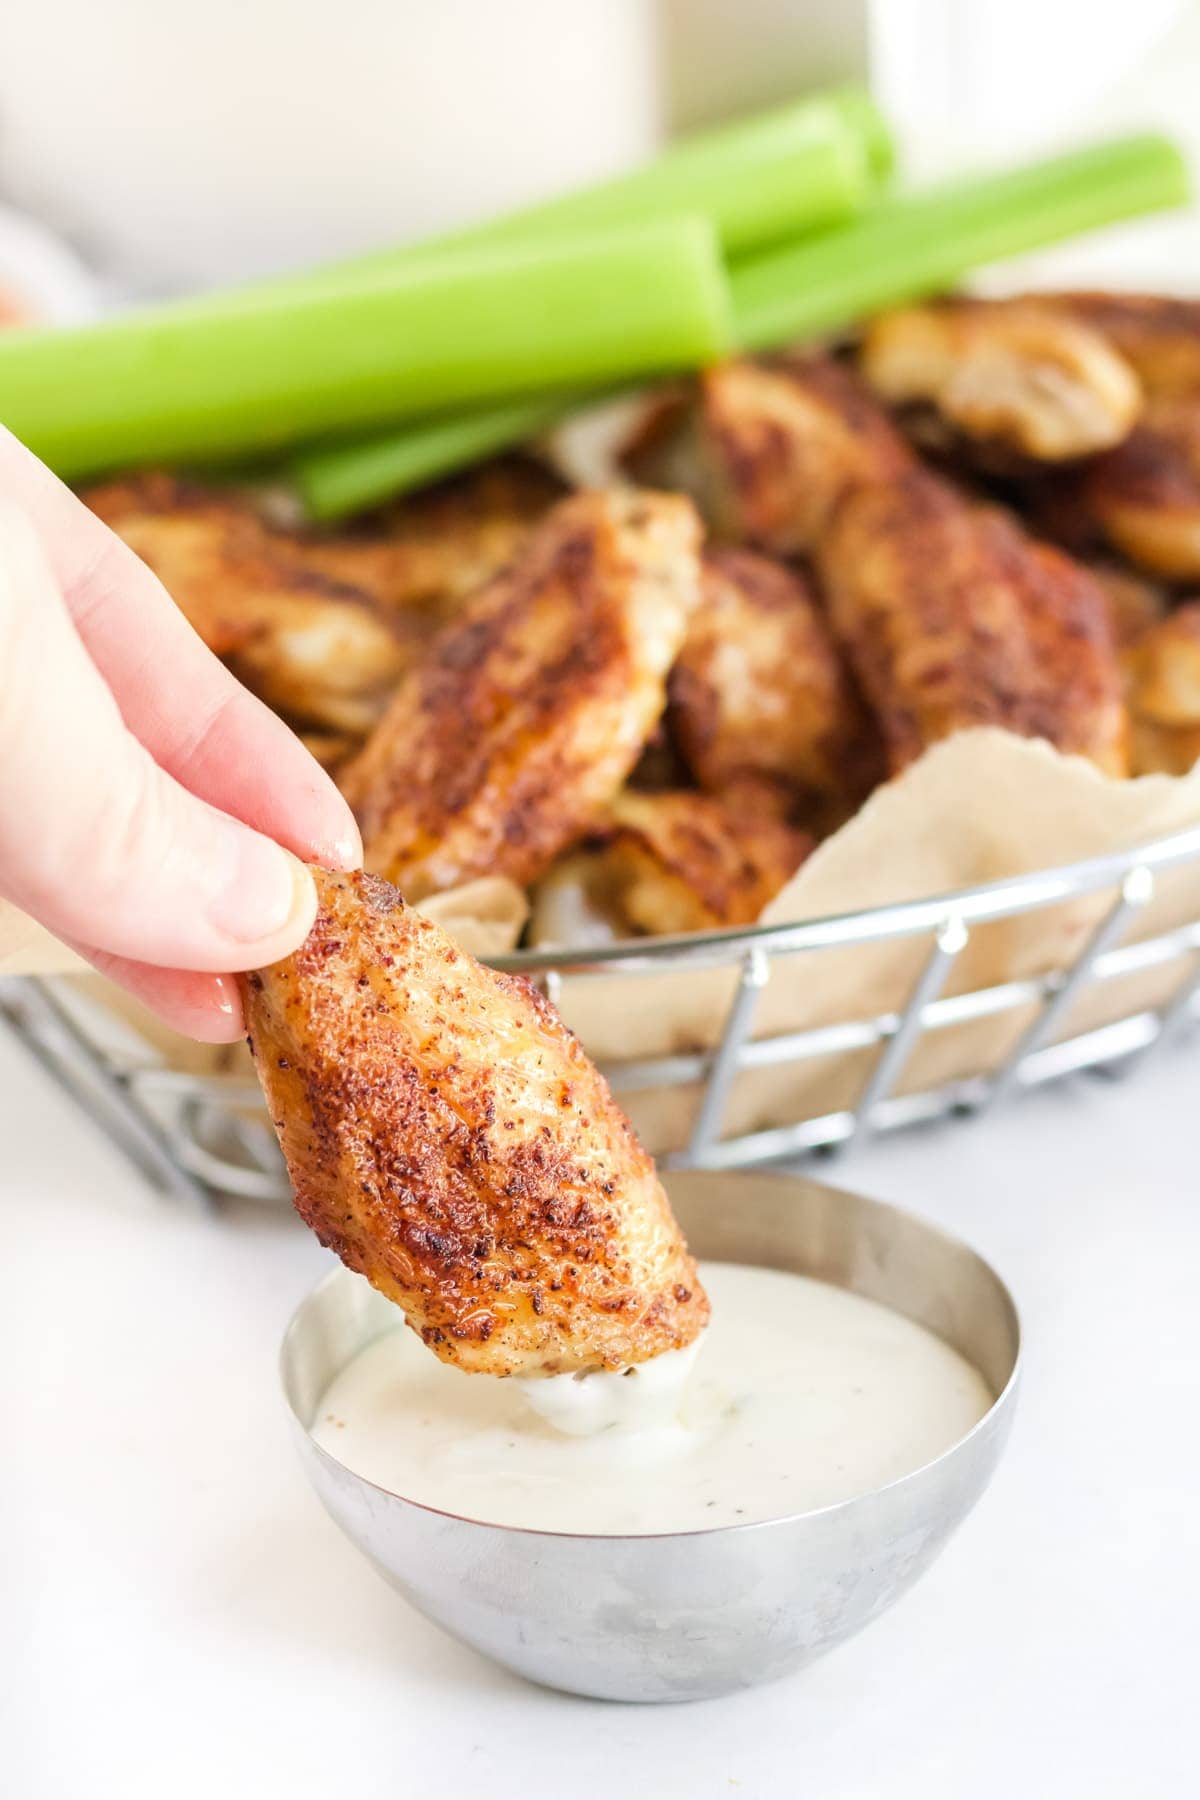 a hand, chicken wing dipped in a dish of ranch, basket of chicken wings, celery